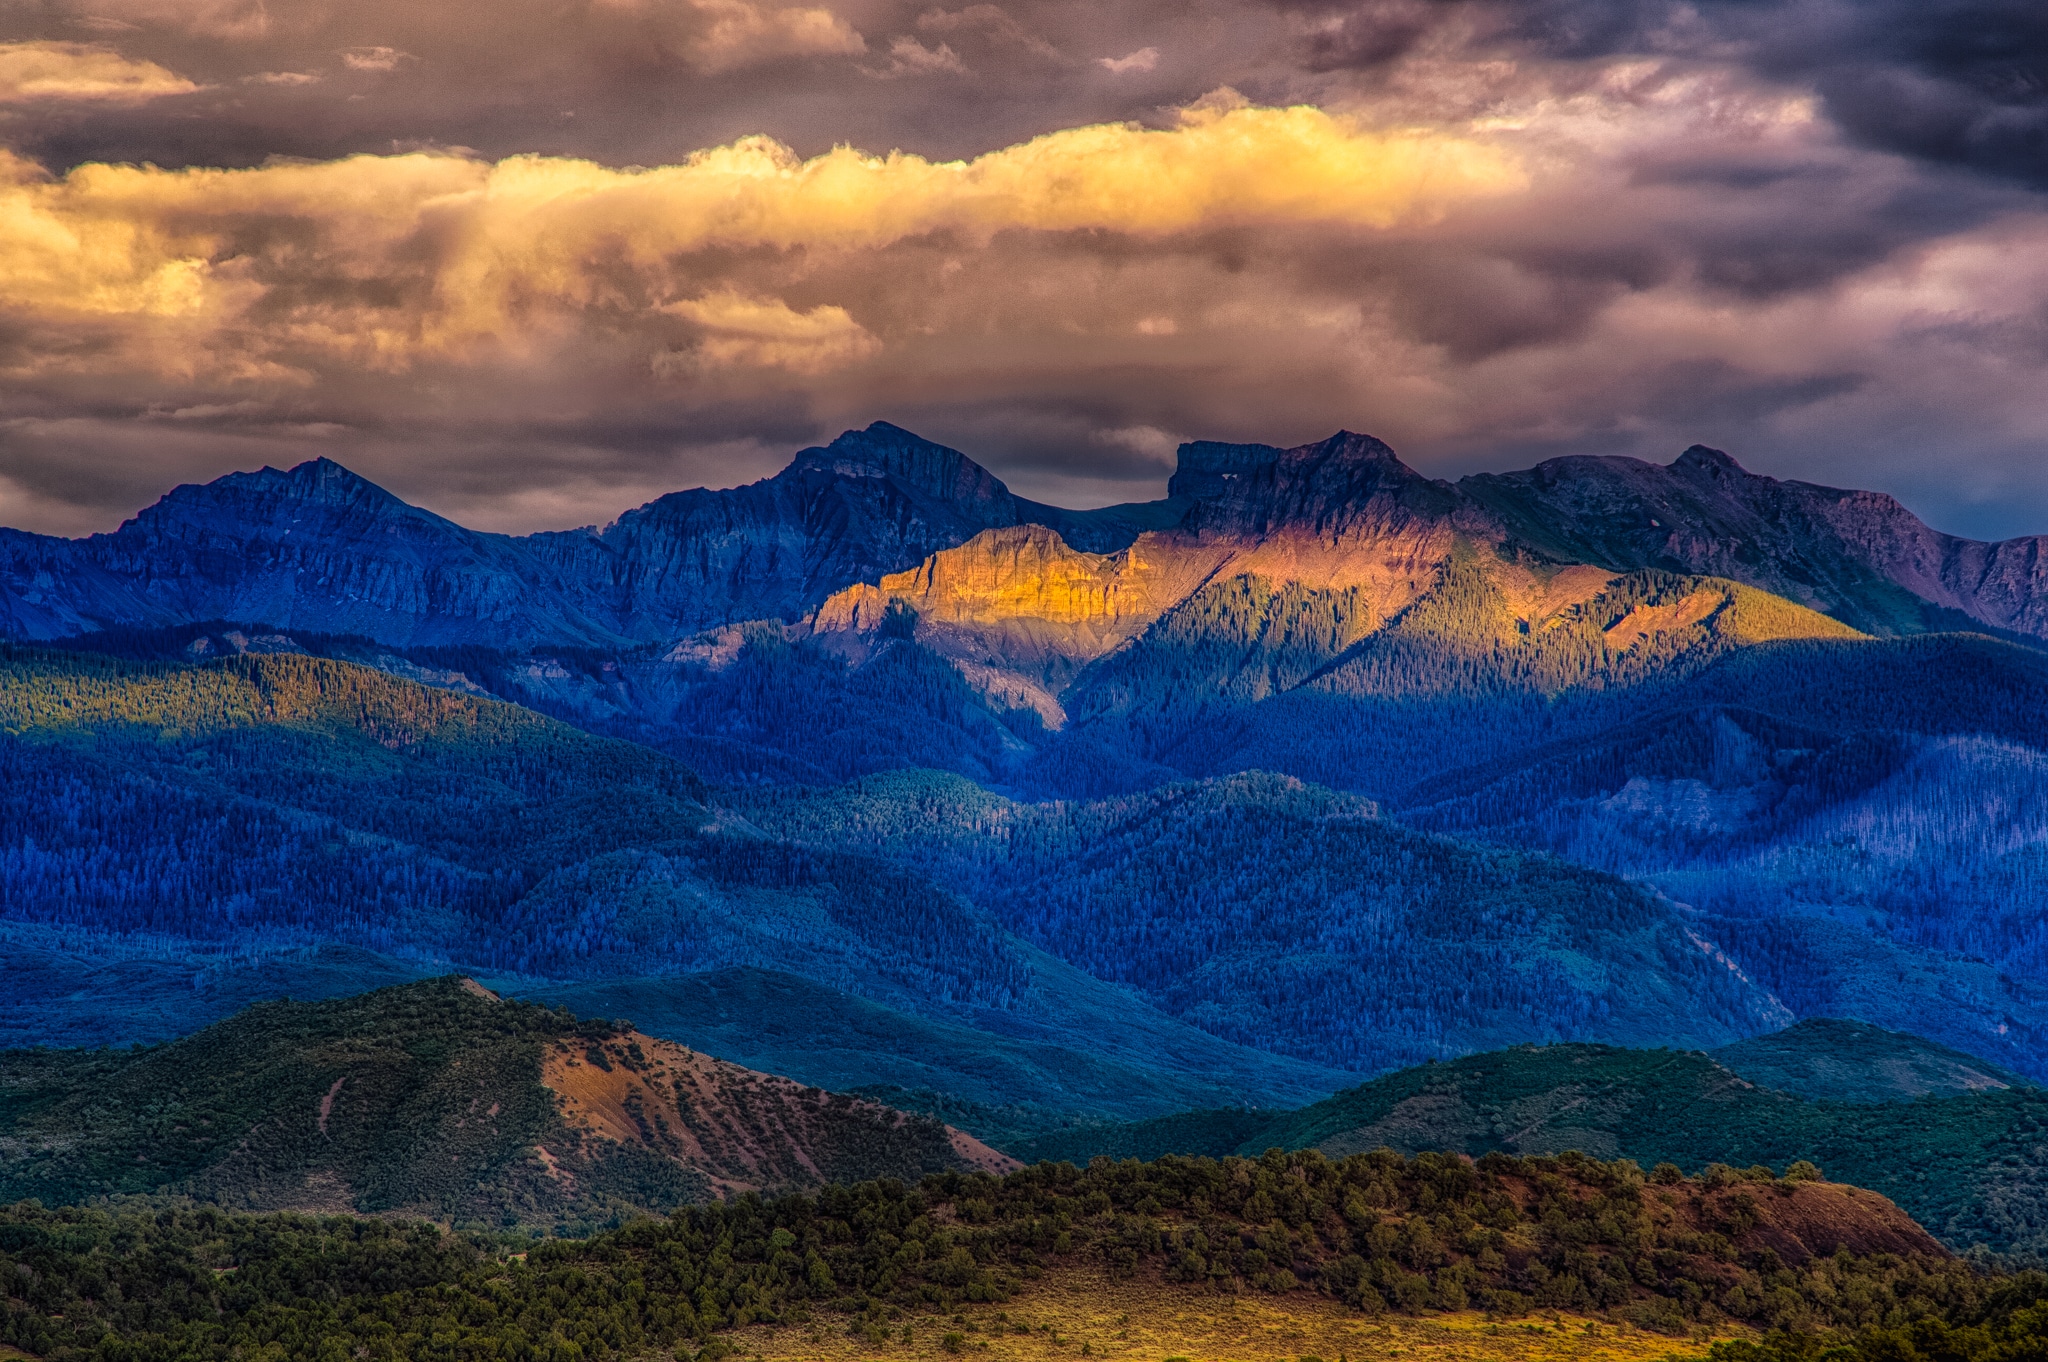 Late afternoon light escapes the heavy cloud cover to illuminate a portion of the Cimarron Mountains. Taken from Ridgway State Park near Ridgway, Colorado.